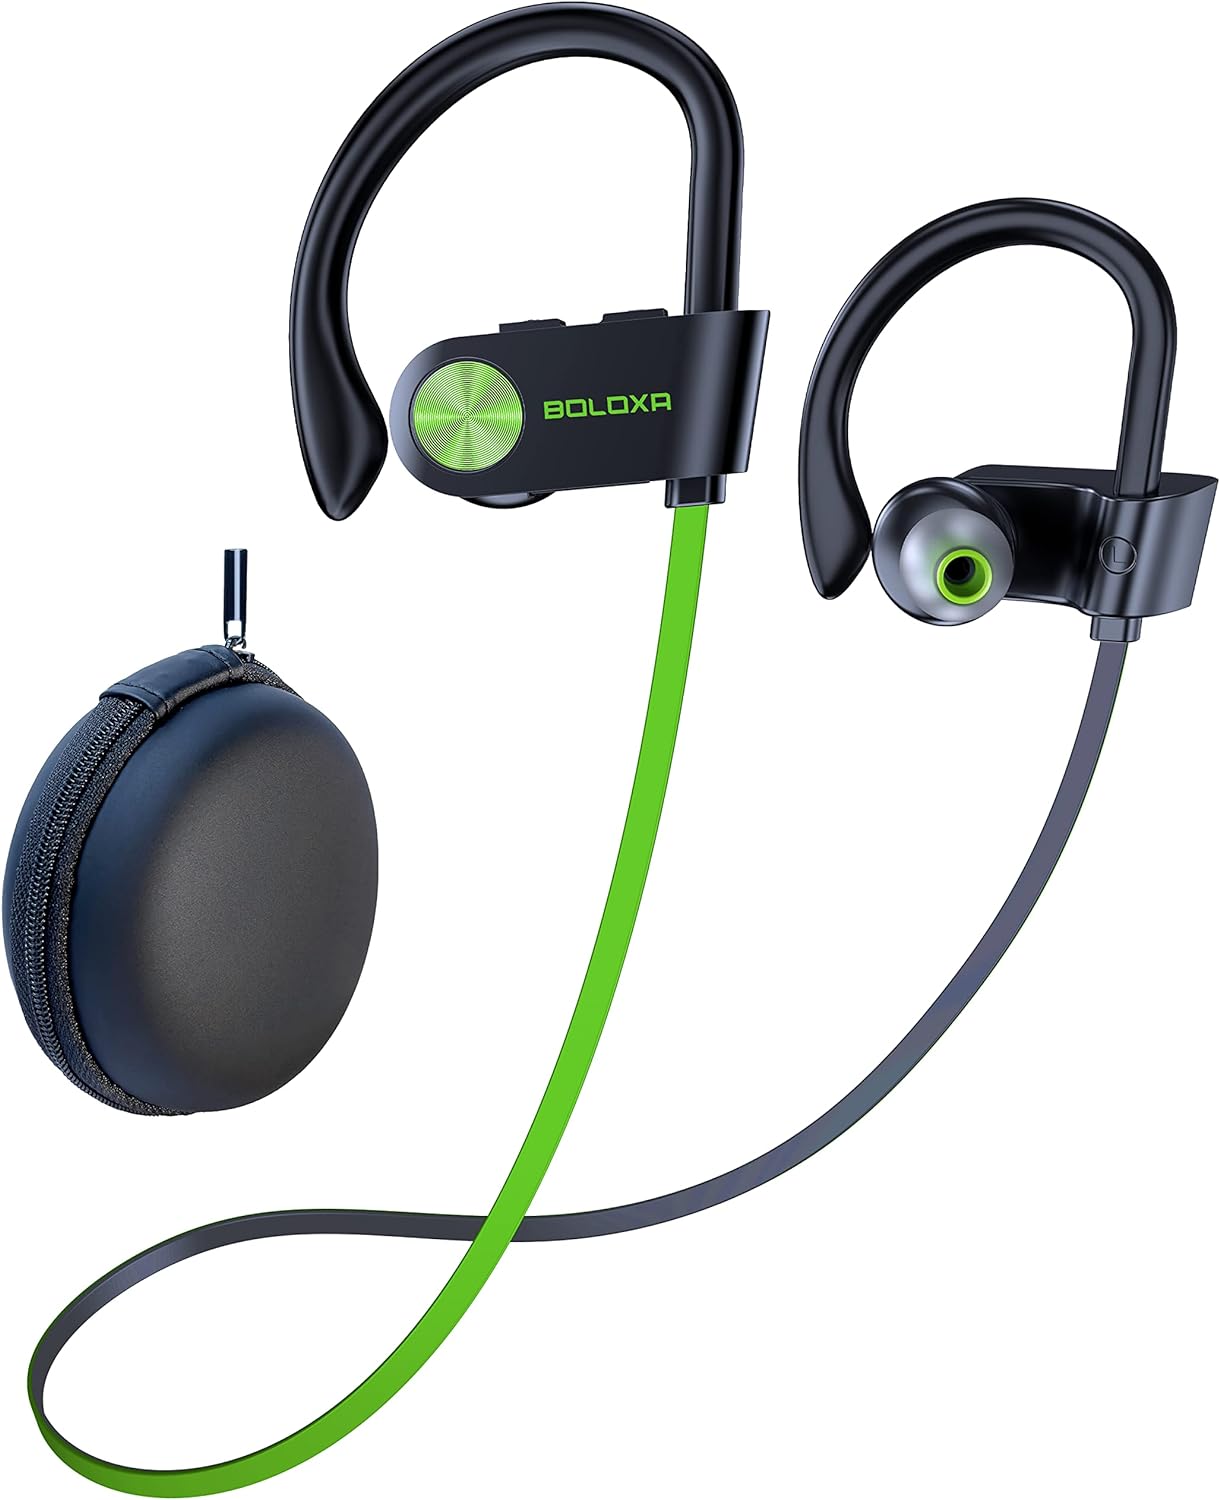 Exclusive Savings for You - BOLOXA Bluetooth Headphones 5.3: 50% Off!